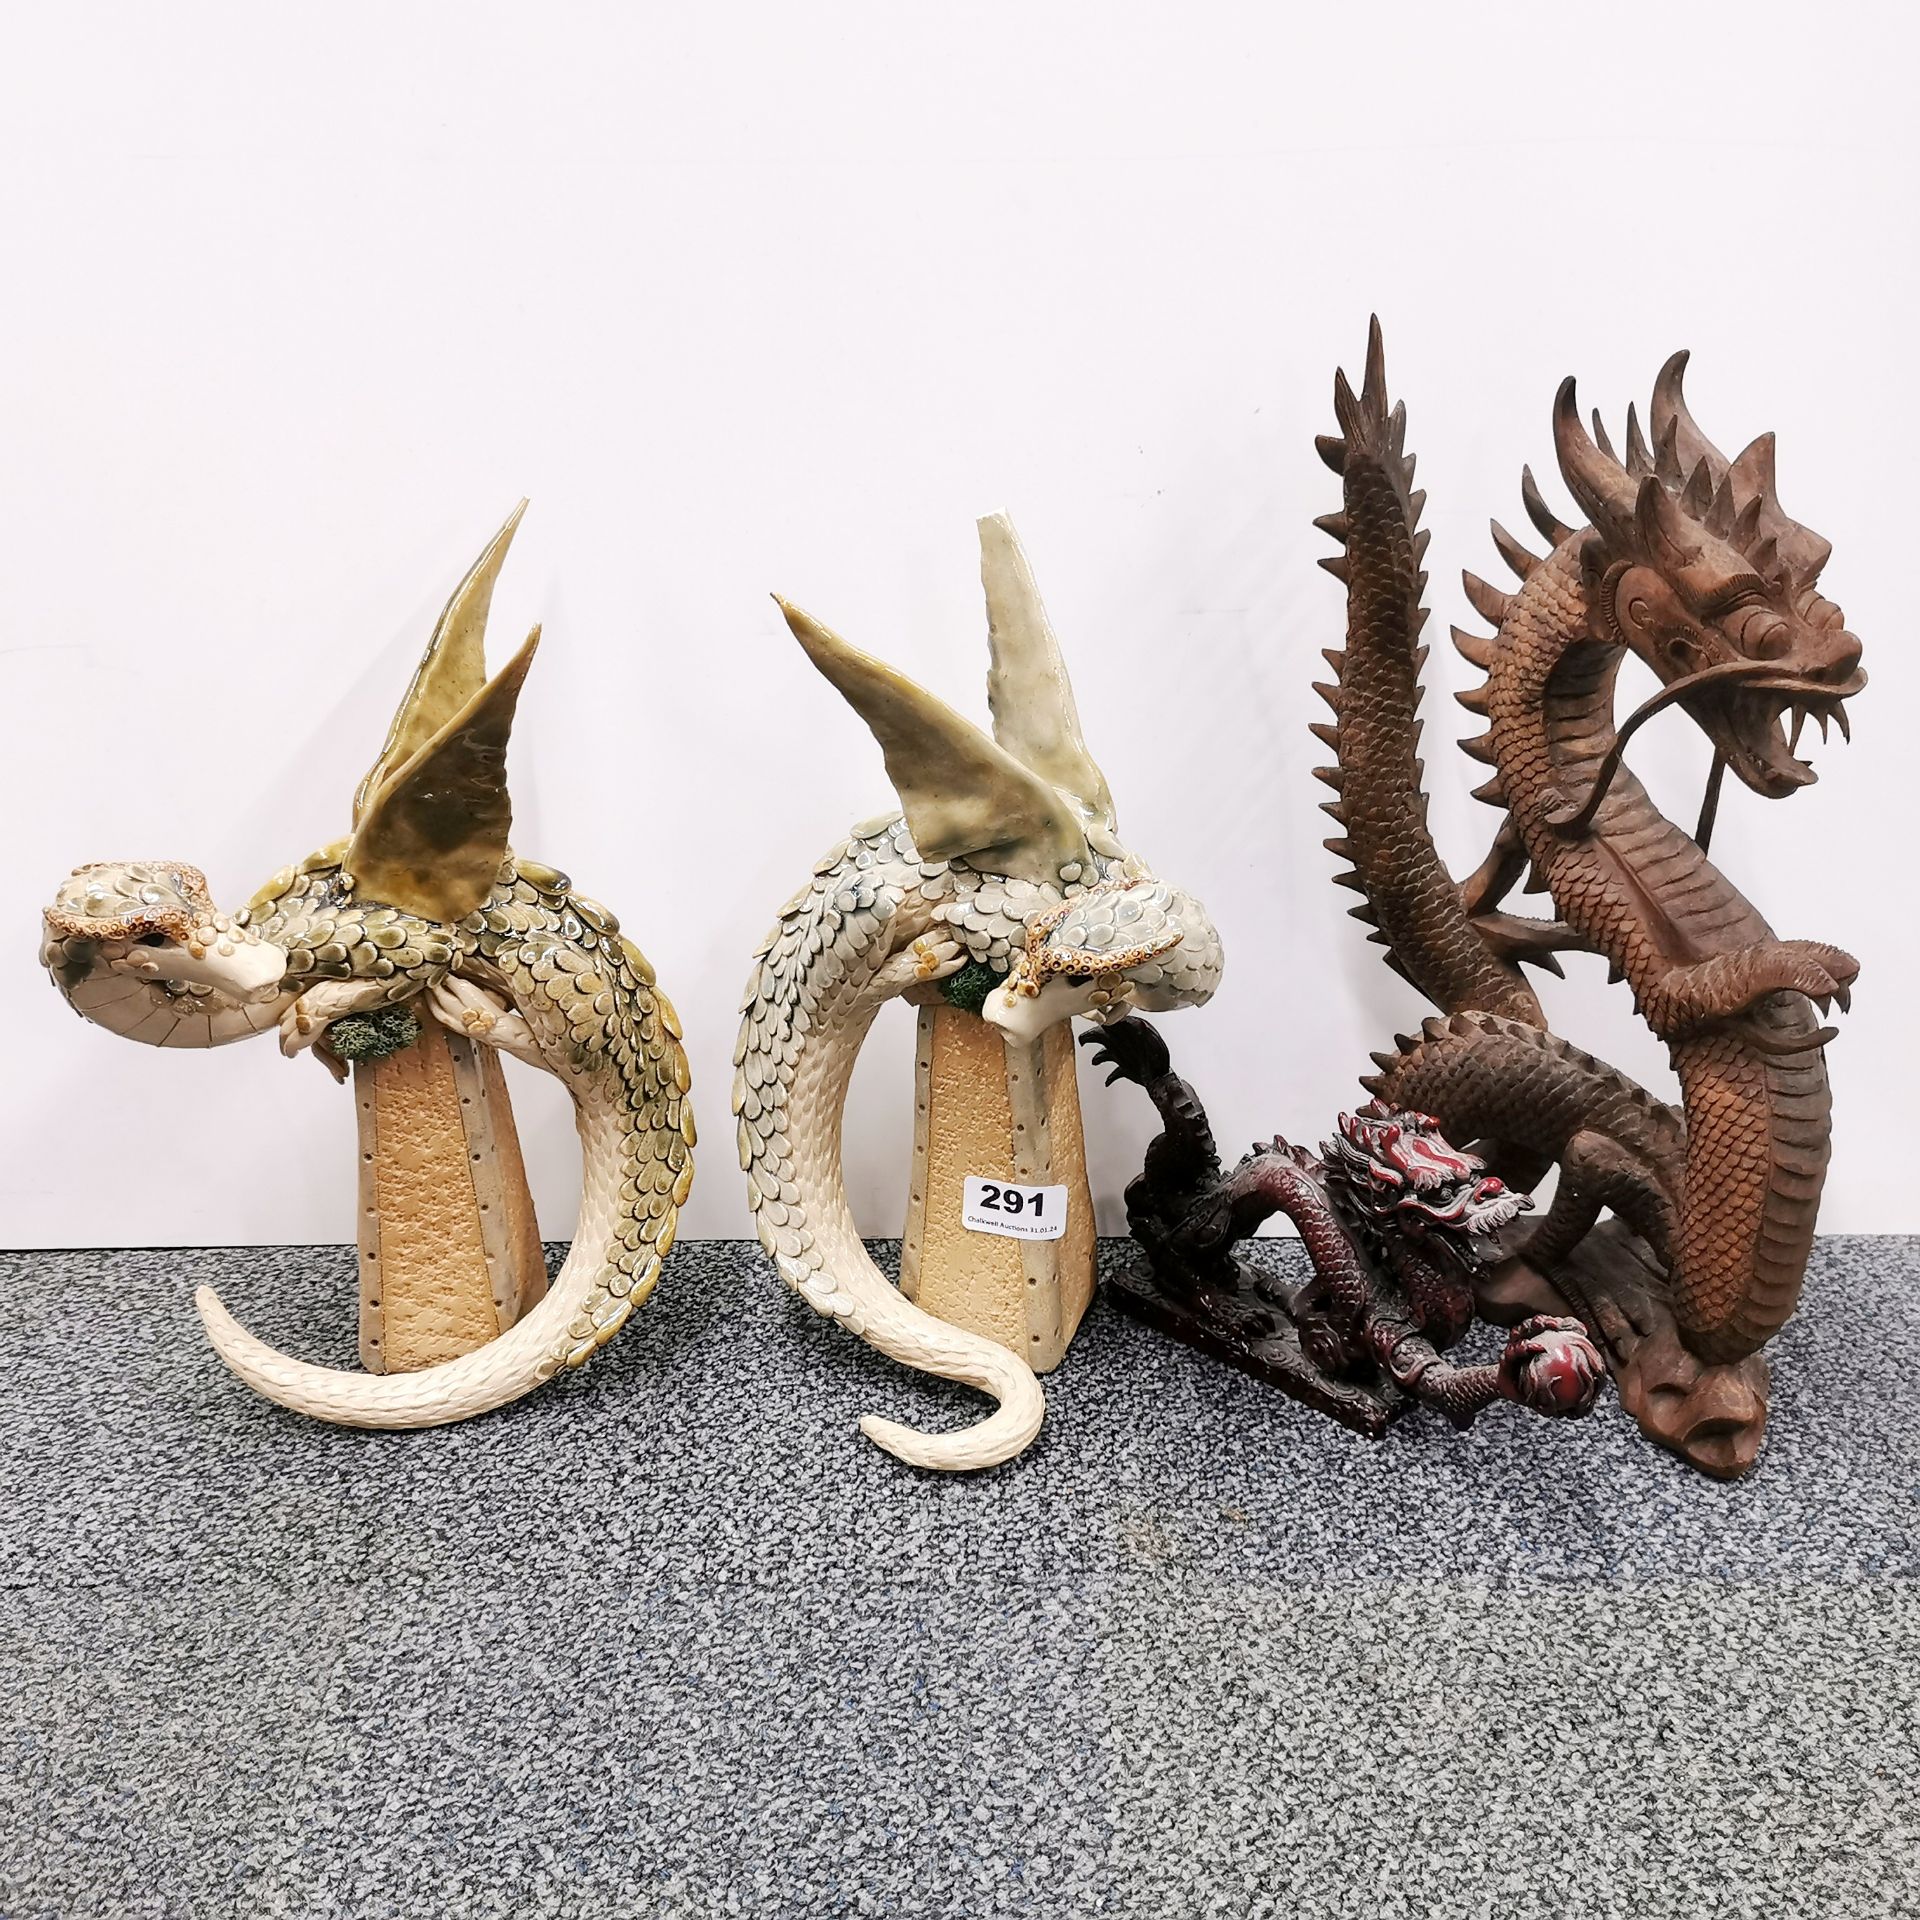 Two glazed pottery figures of dragons by Karen Lainson, H. 30cm, together with a carved wooden